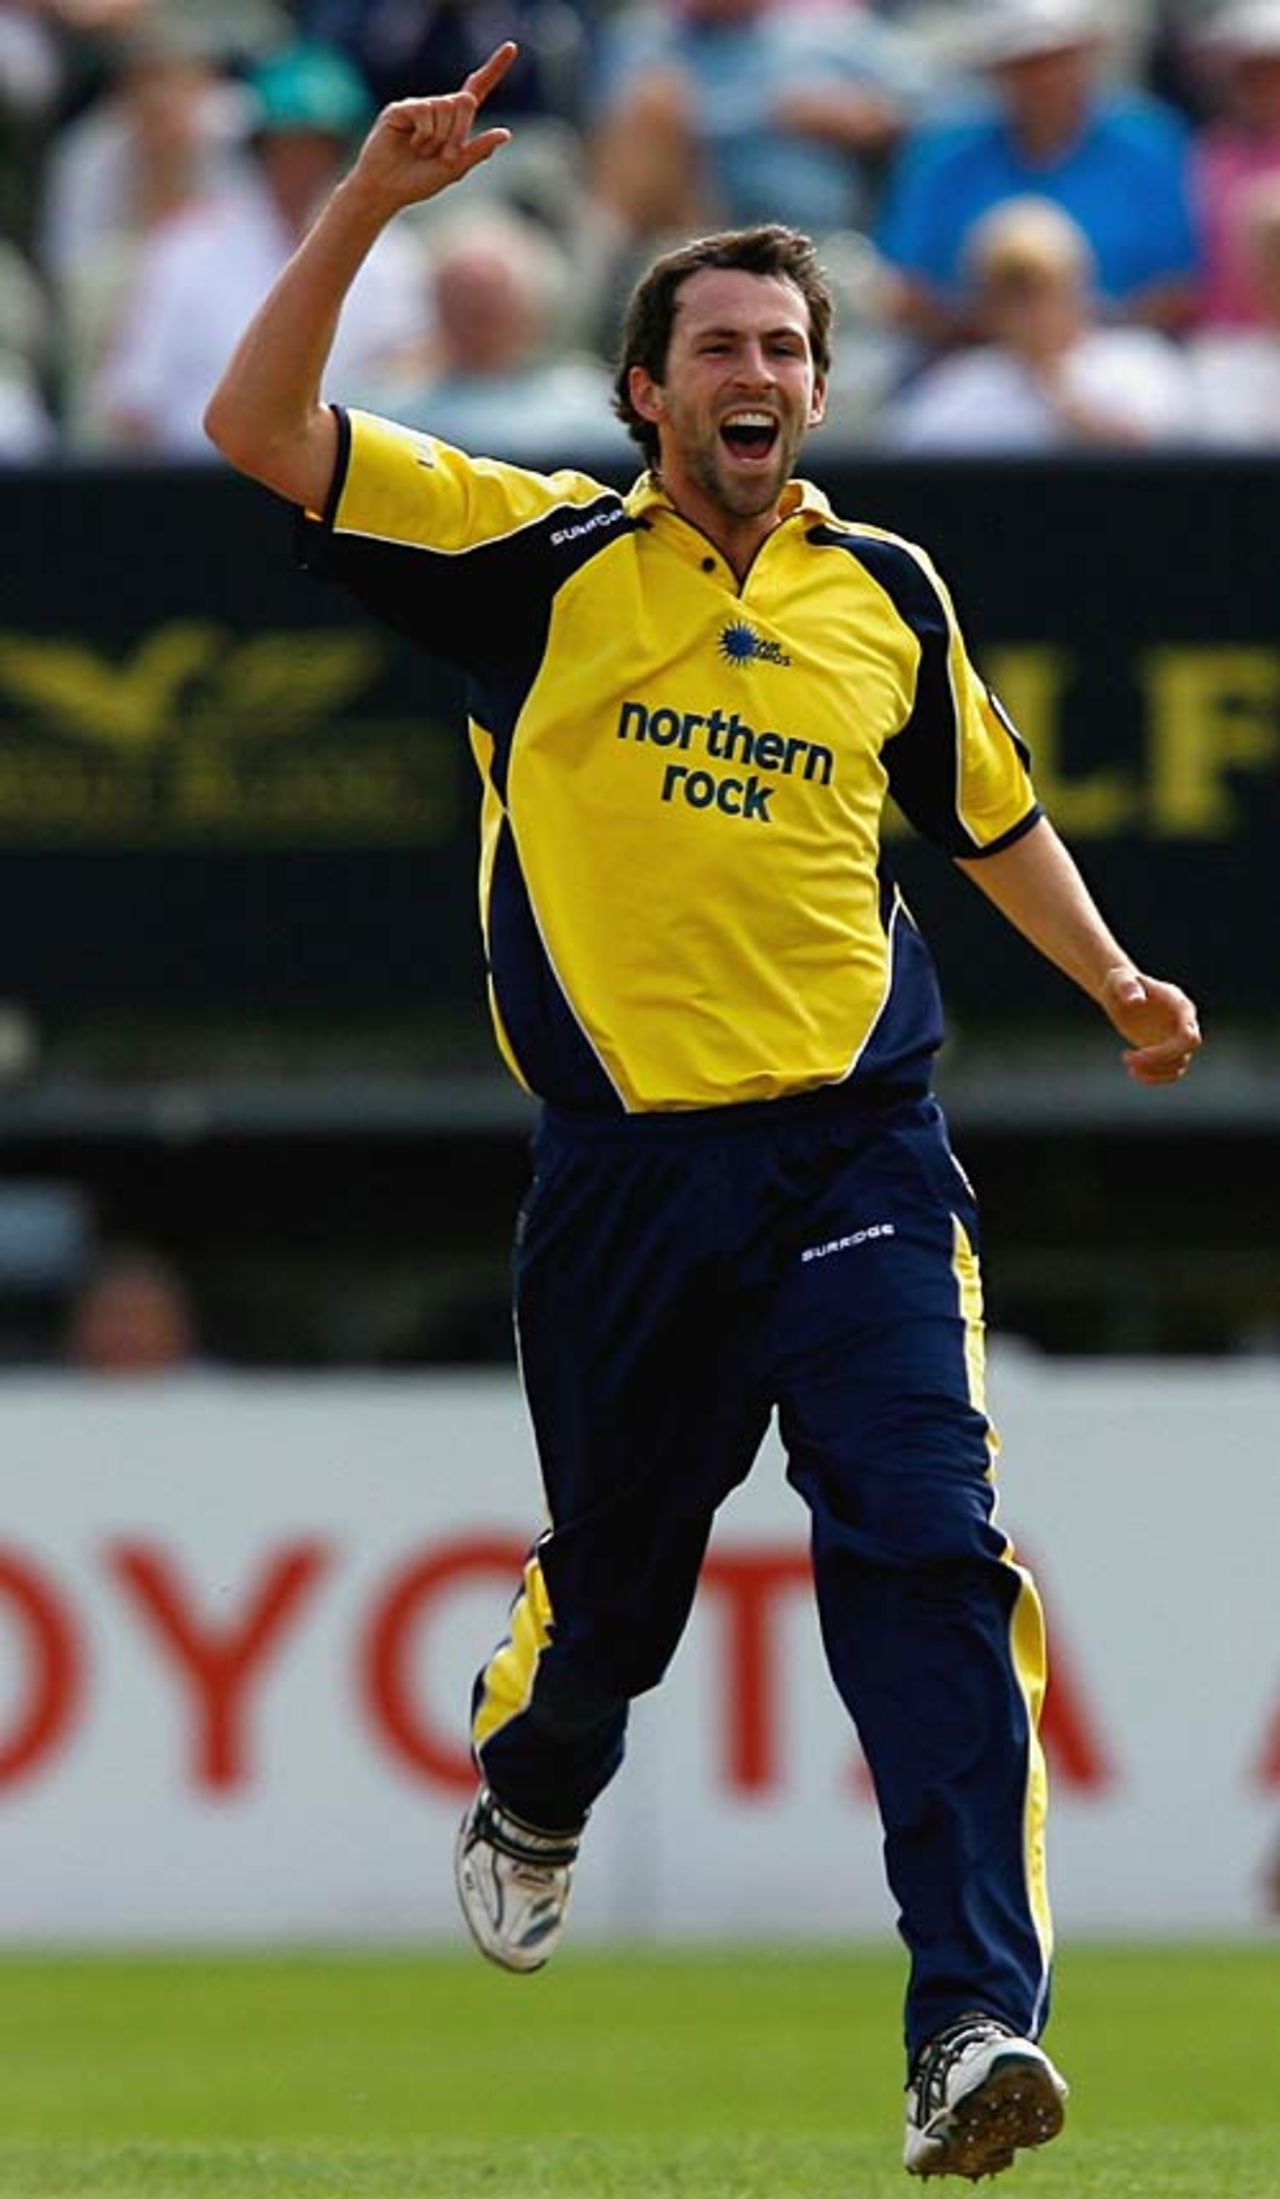 Graham Onions celebrates a wicket on the day he was called-up to the England one-day squad, Warwickshire v Durham, Pro40, Edgbaston, September 3, 2006